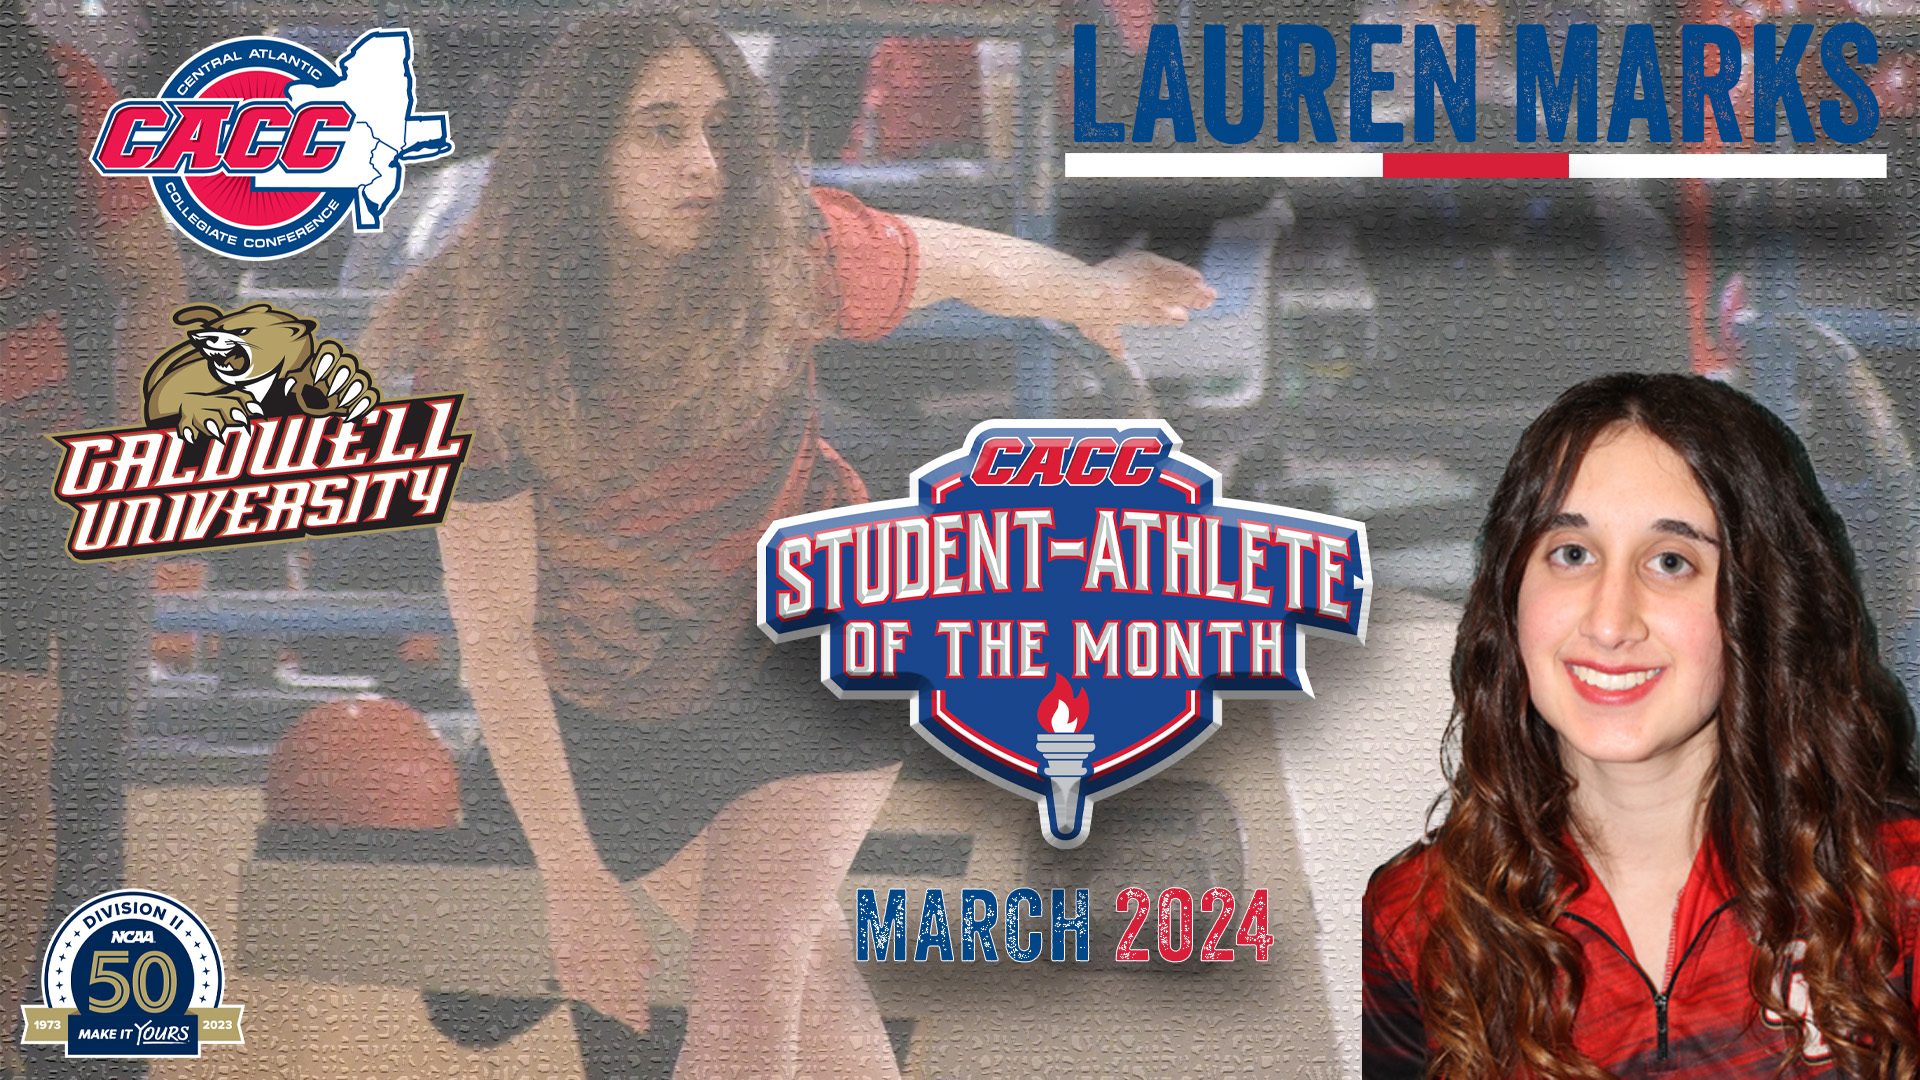 Caldwell's Lauren Marks Named CACC March S-A of the Month